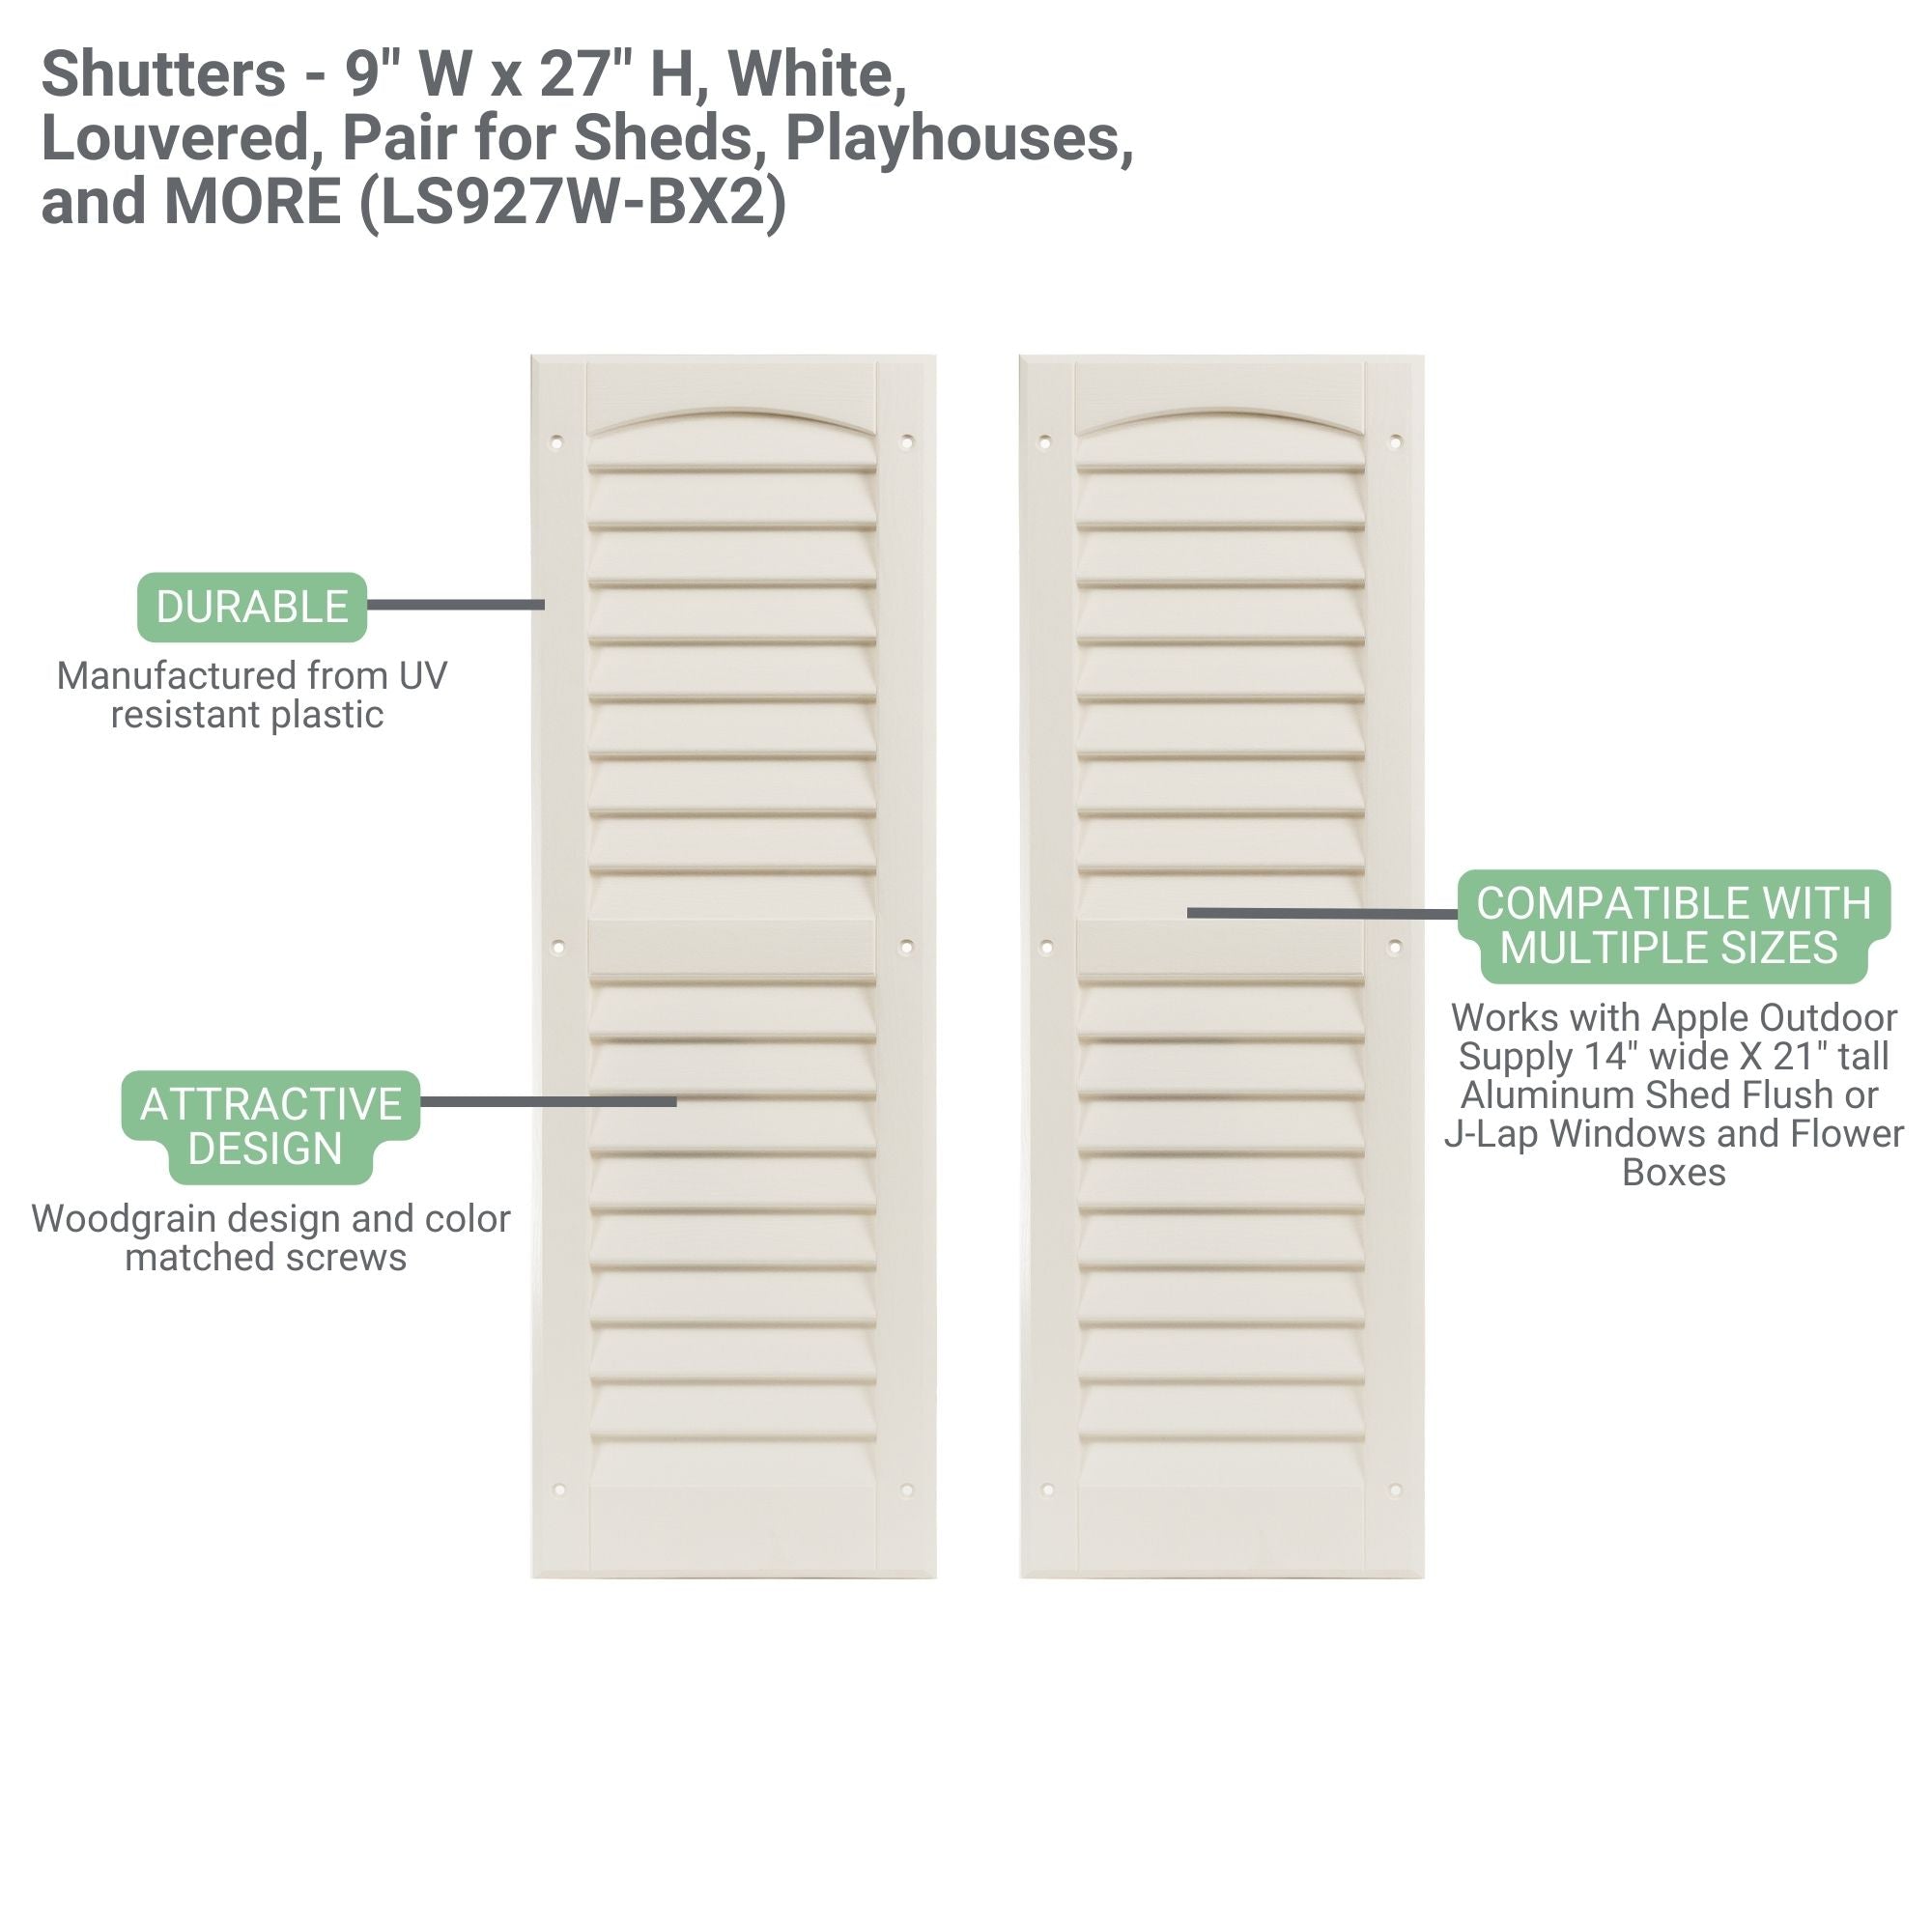 Shutters - 9" W x 27" H Louvered Shutters, Paintable 1 Pair